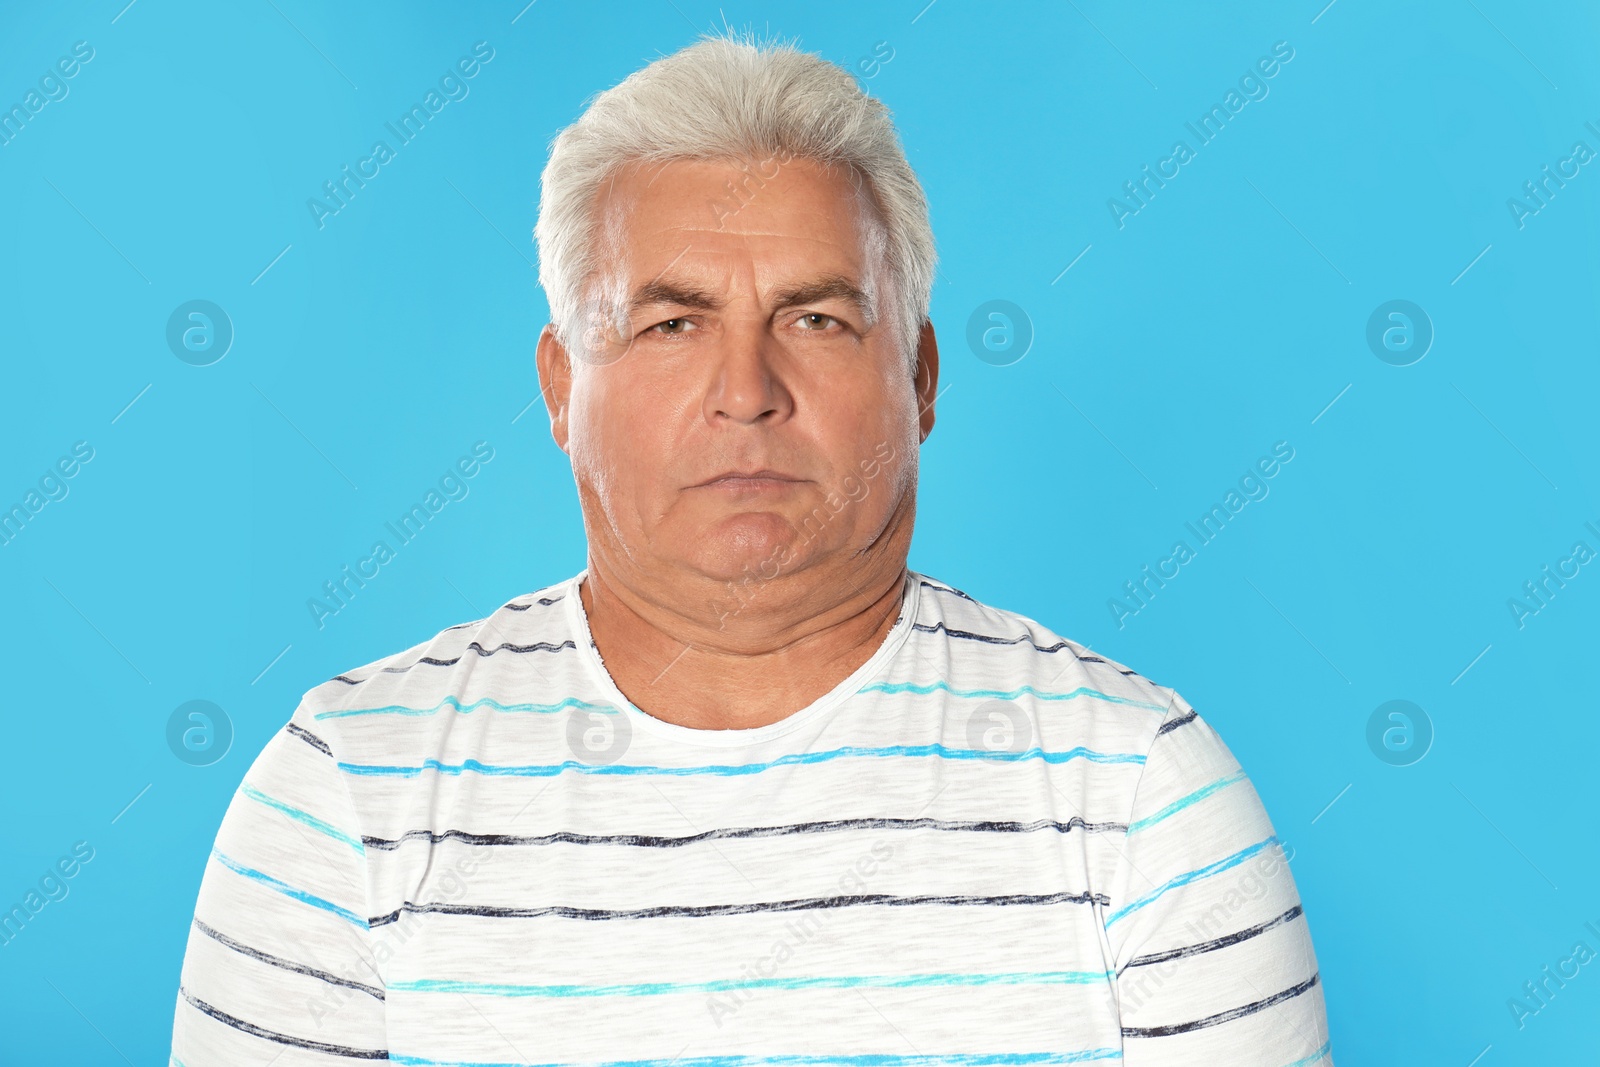 Photo of Mature man with double chin on blue background